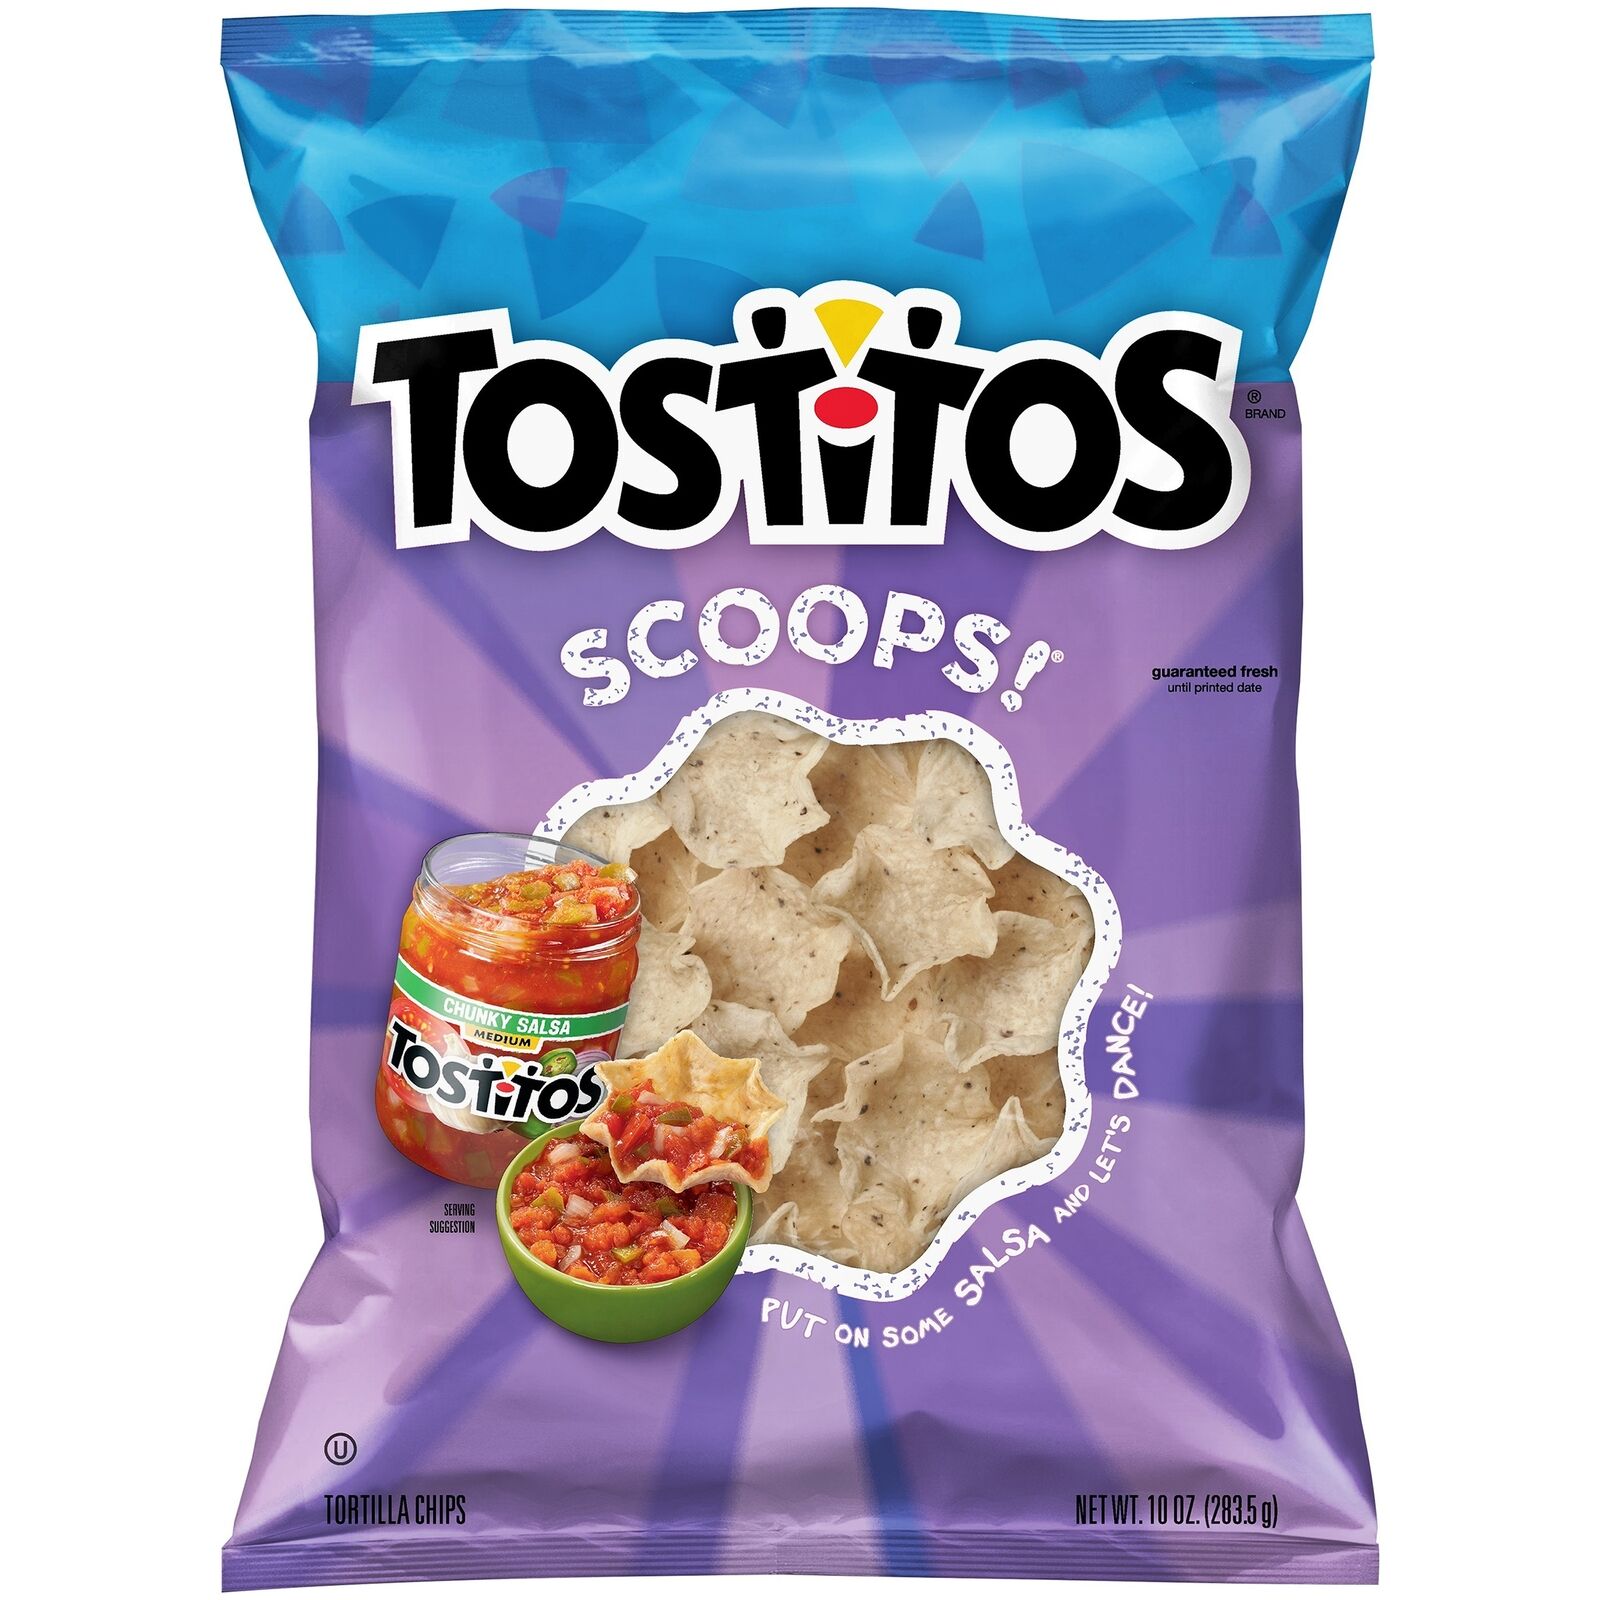 Tostitos Scoops 283G